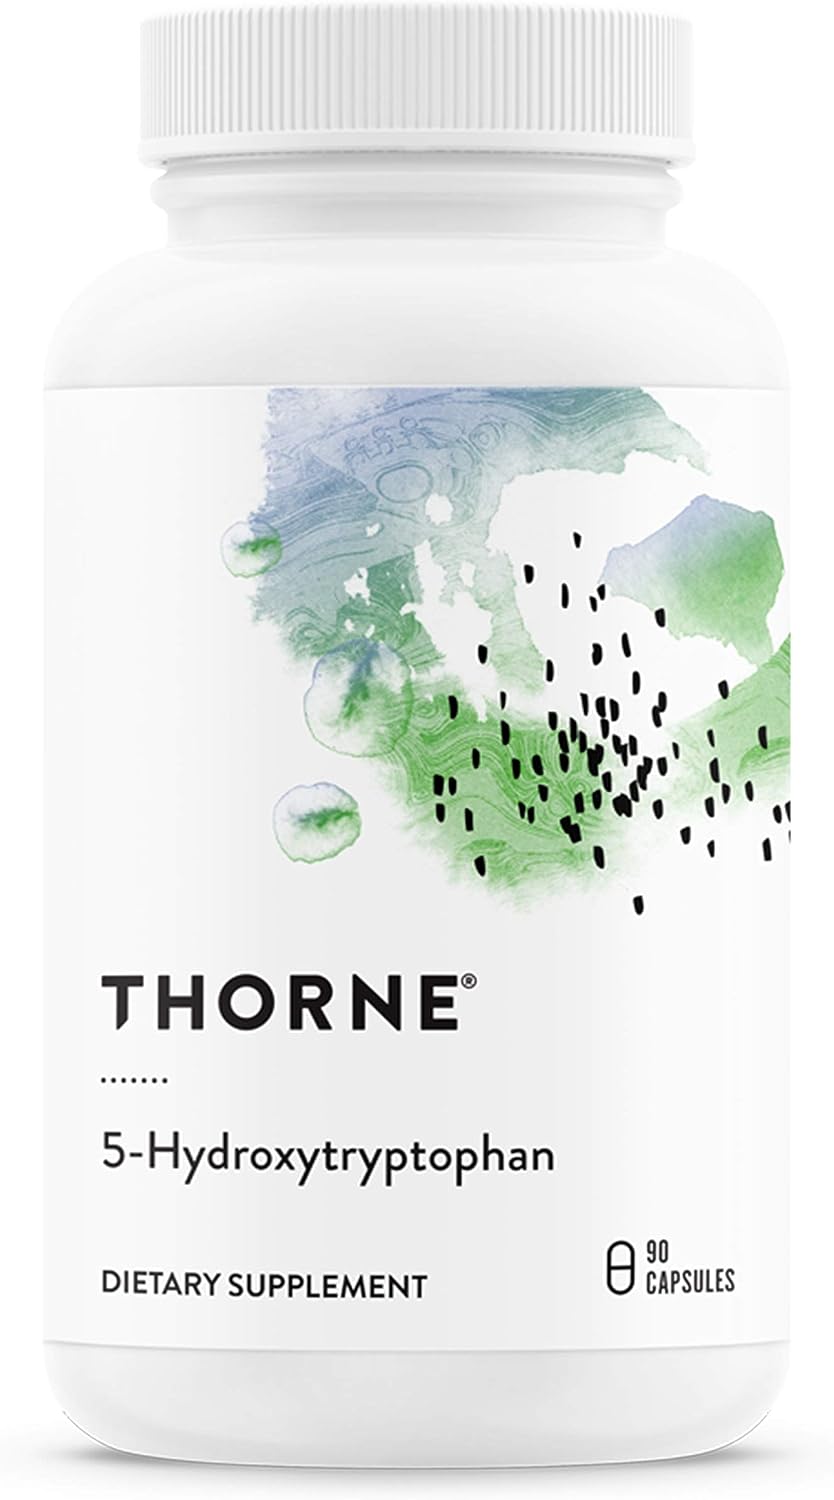 Thorne 5-Hydroxytryptophan (5-HTP) - Serotonin Support for Sleep and Stress Management - 90 Capsules